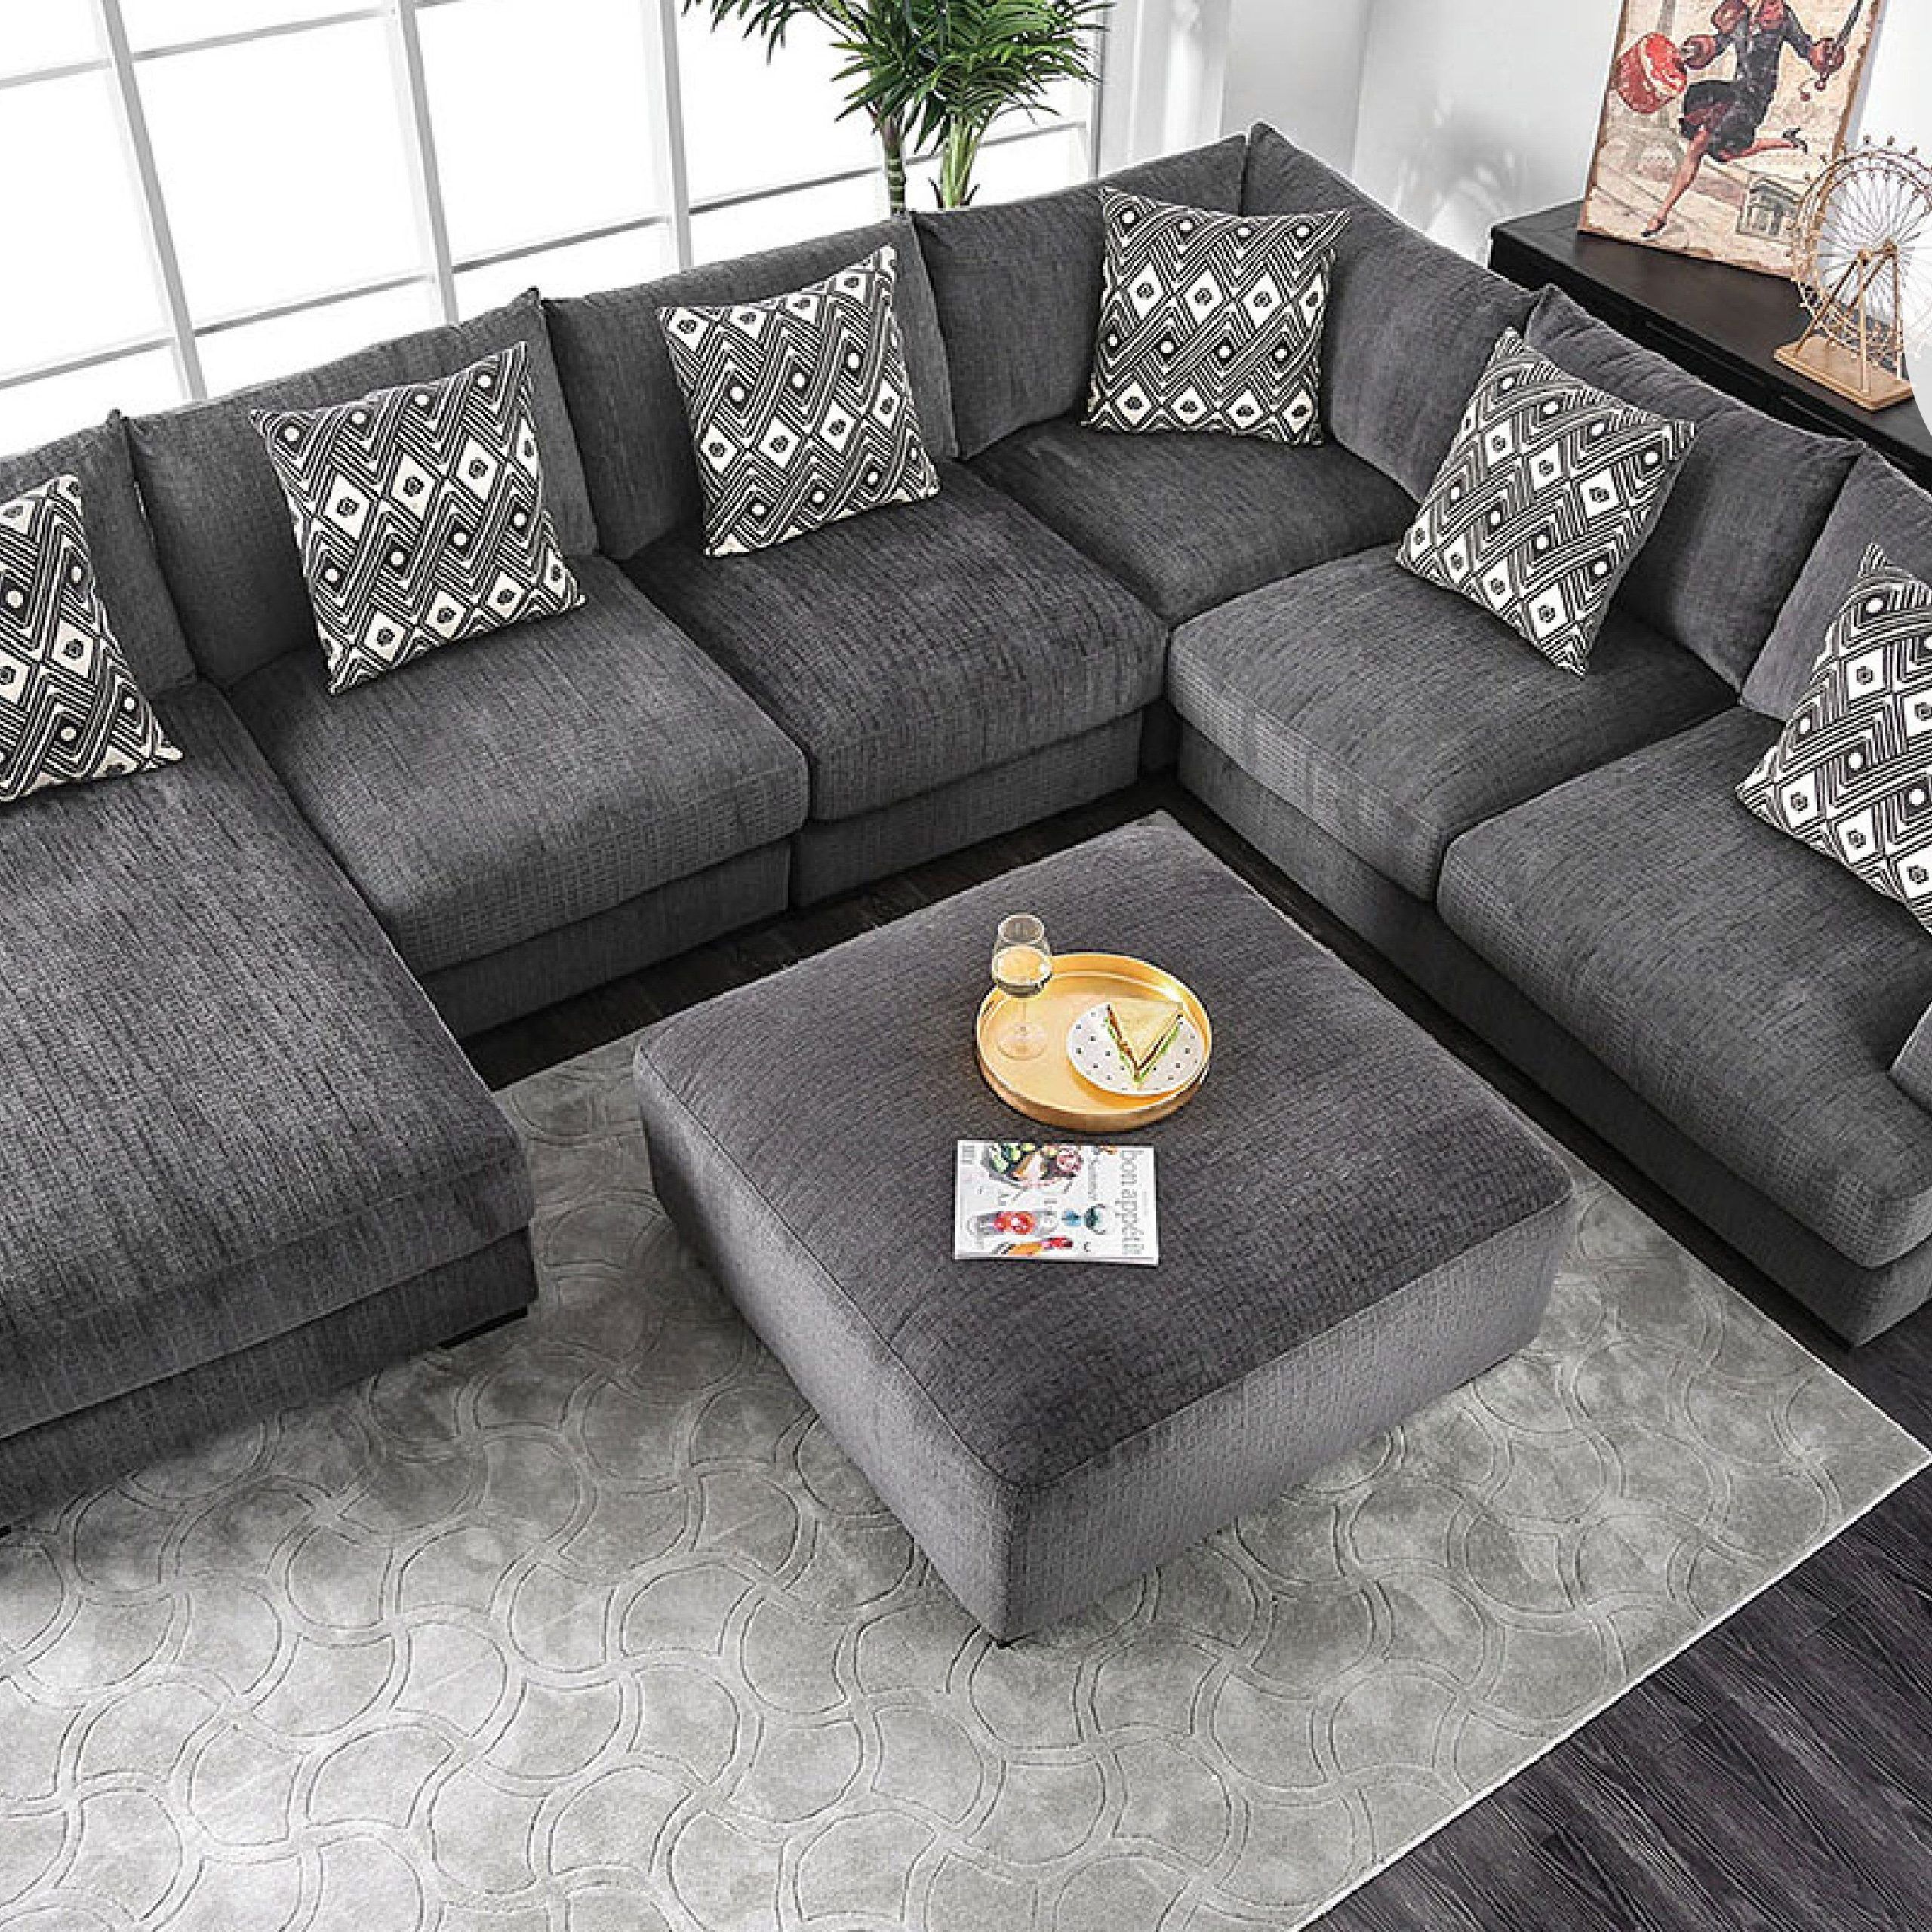 5 Pc Kaylee Gray Chenille Fabric Sectional Sofa Set With Chaise And Throughout Chenille Sectional Sofas (View 7 of 20)